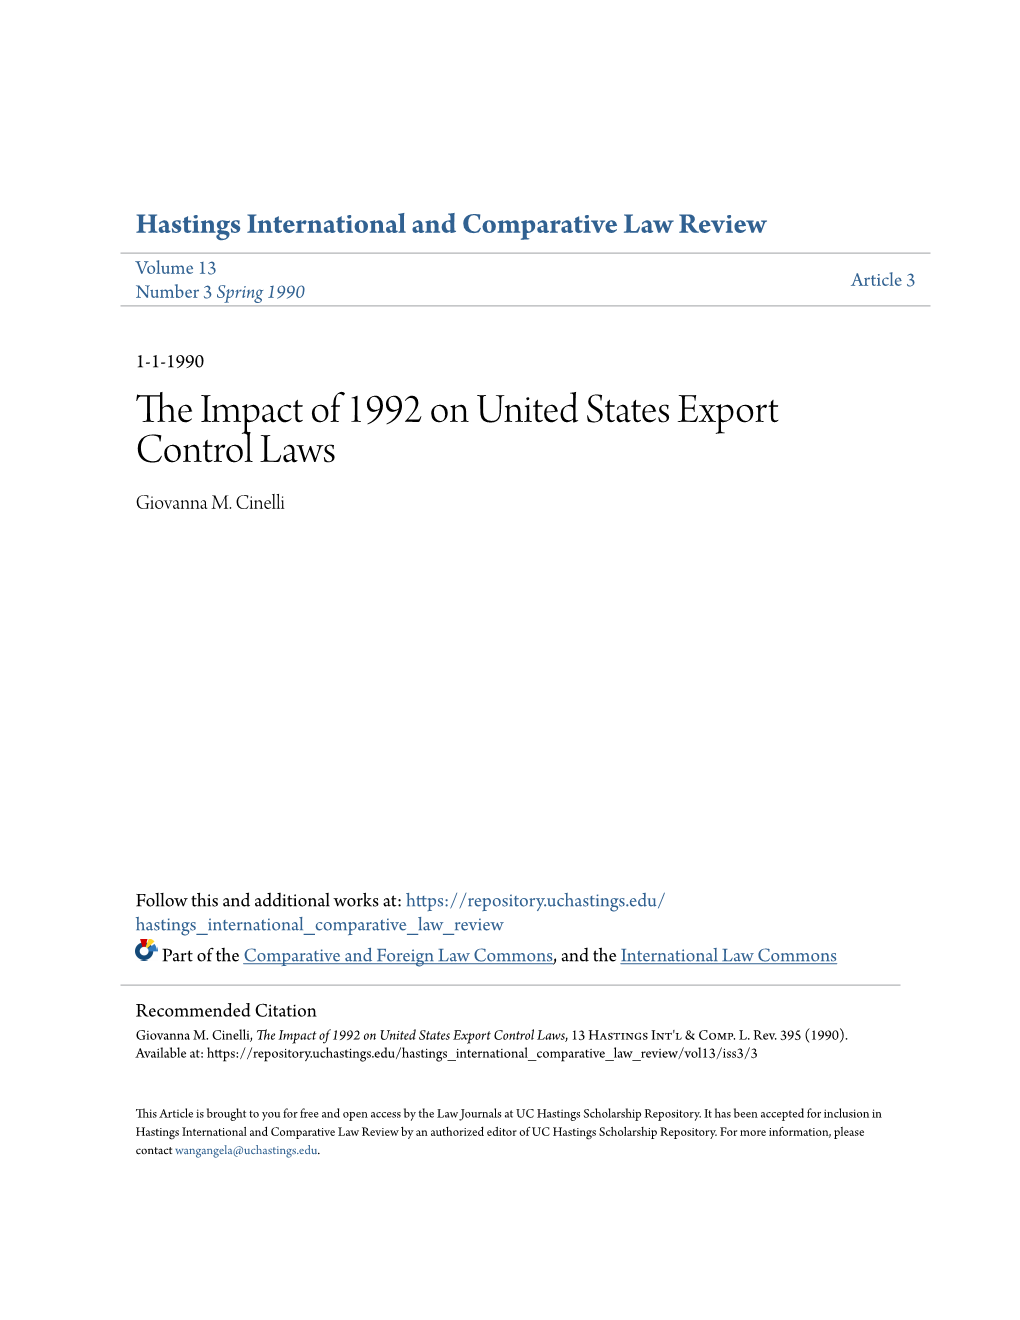 The Impact of 1992 on United States Export Control Laws, 13 Hastings Int'l & Comp